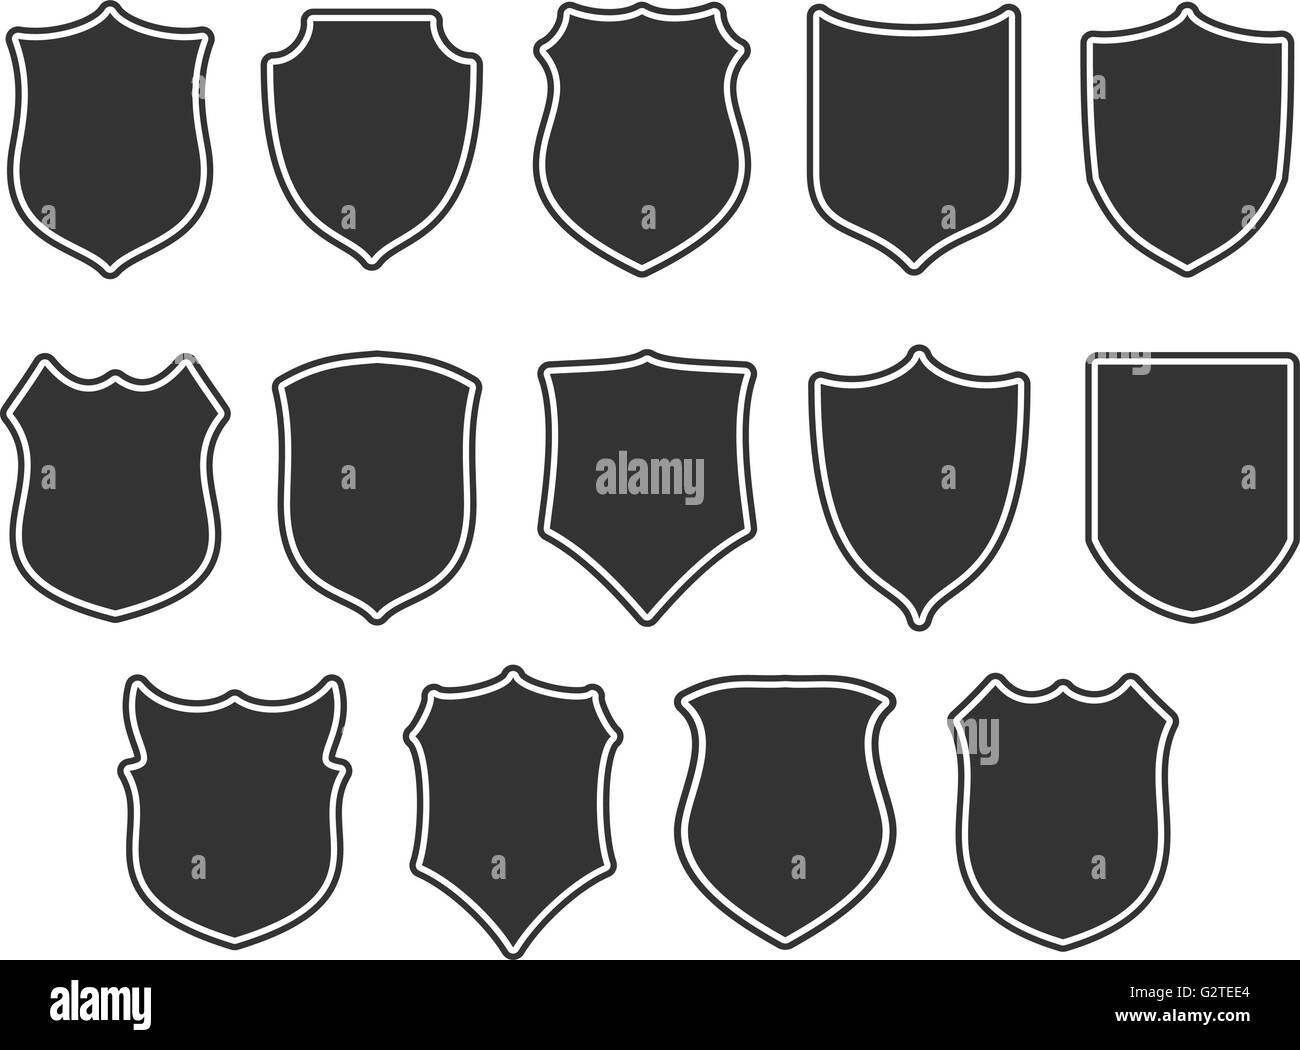 Set of shields isolated on white Stock Vector